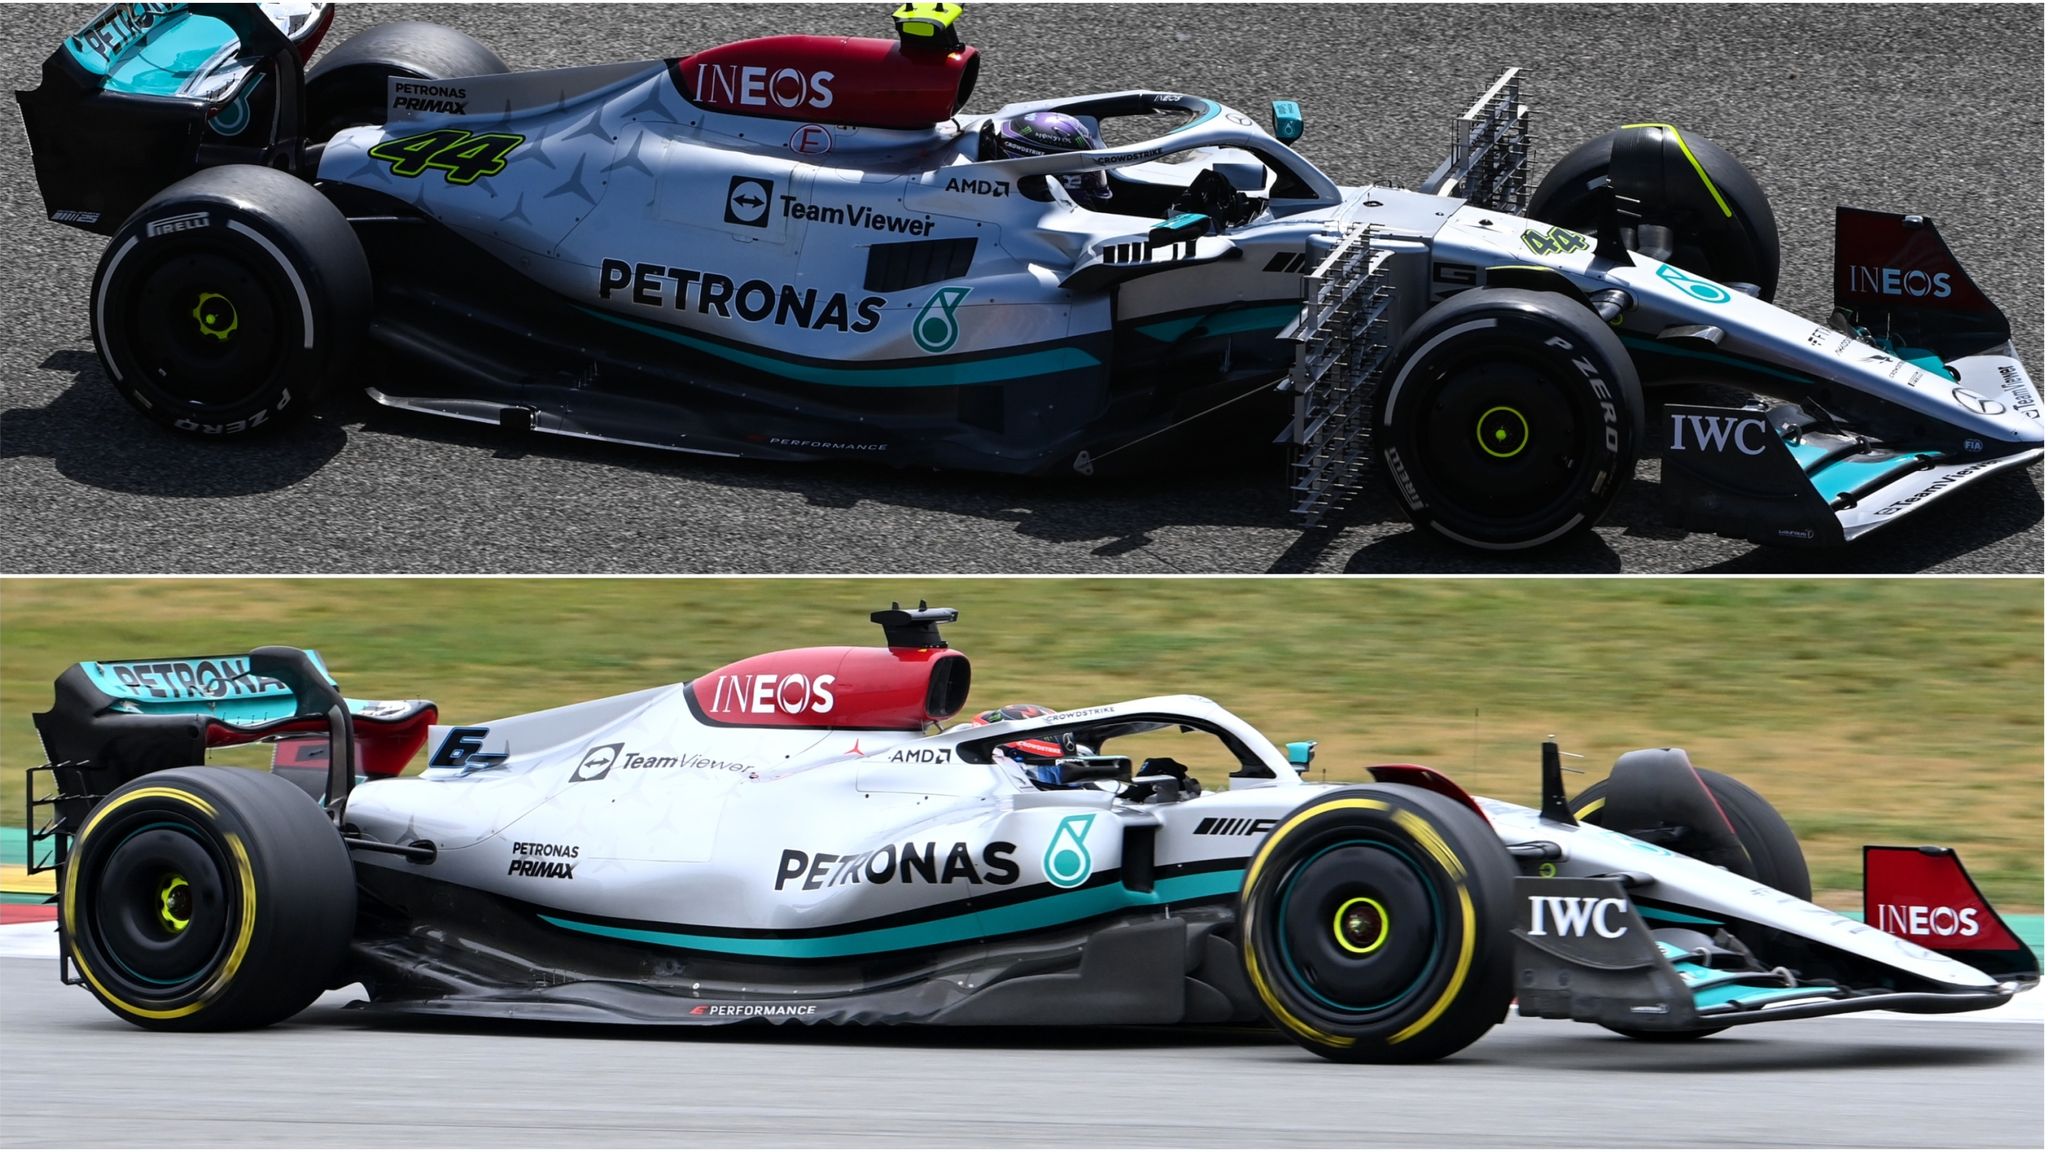 F1 Testing Mercedes attract attention in Bahrain with radical no sidepod design on new-look car F1 News